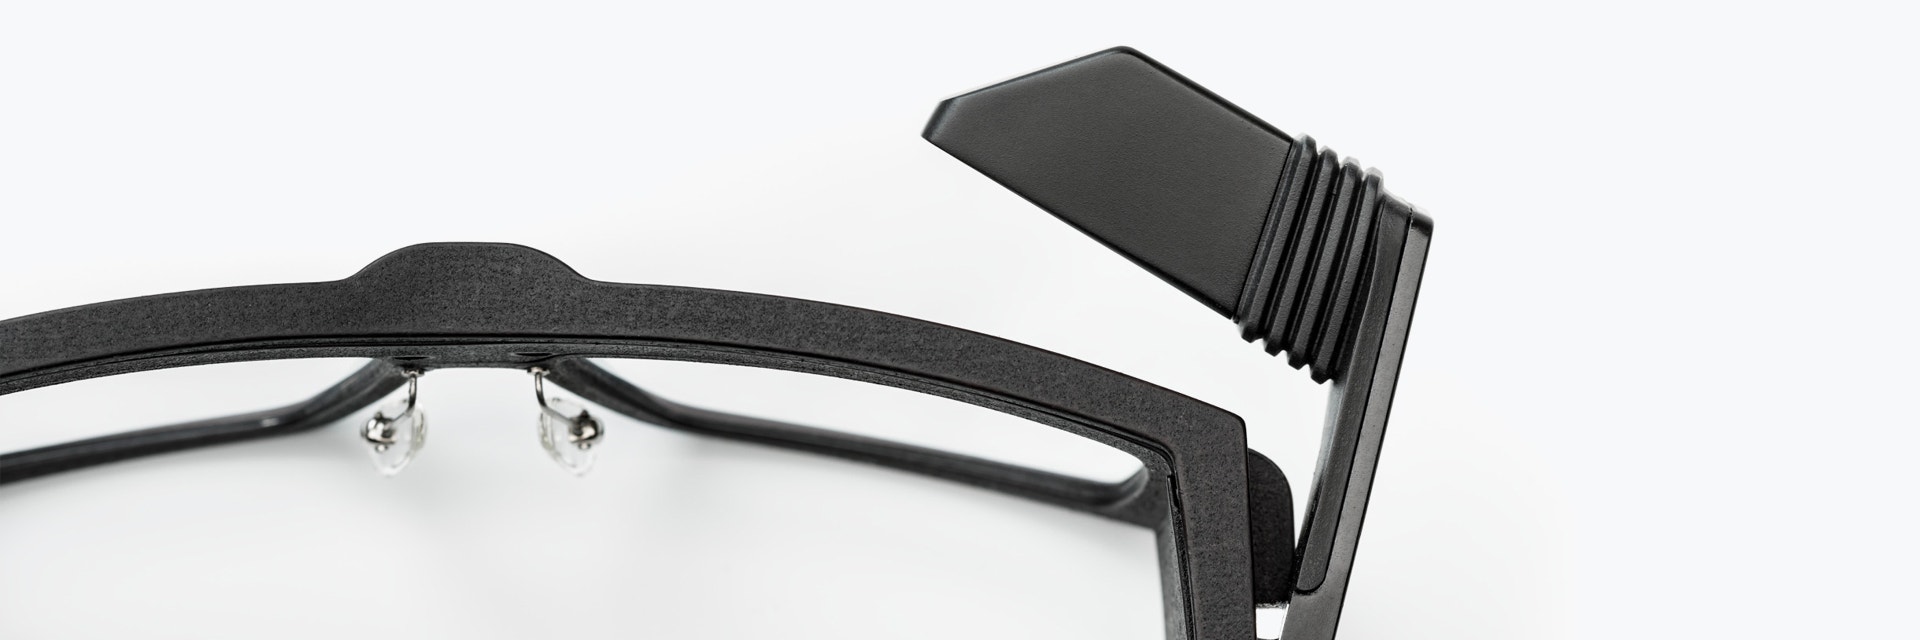 Close-up of the 3-axis Pivot from the Iristick Z1 smart safety glasses